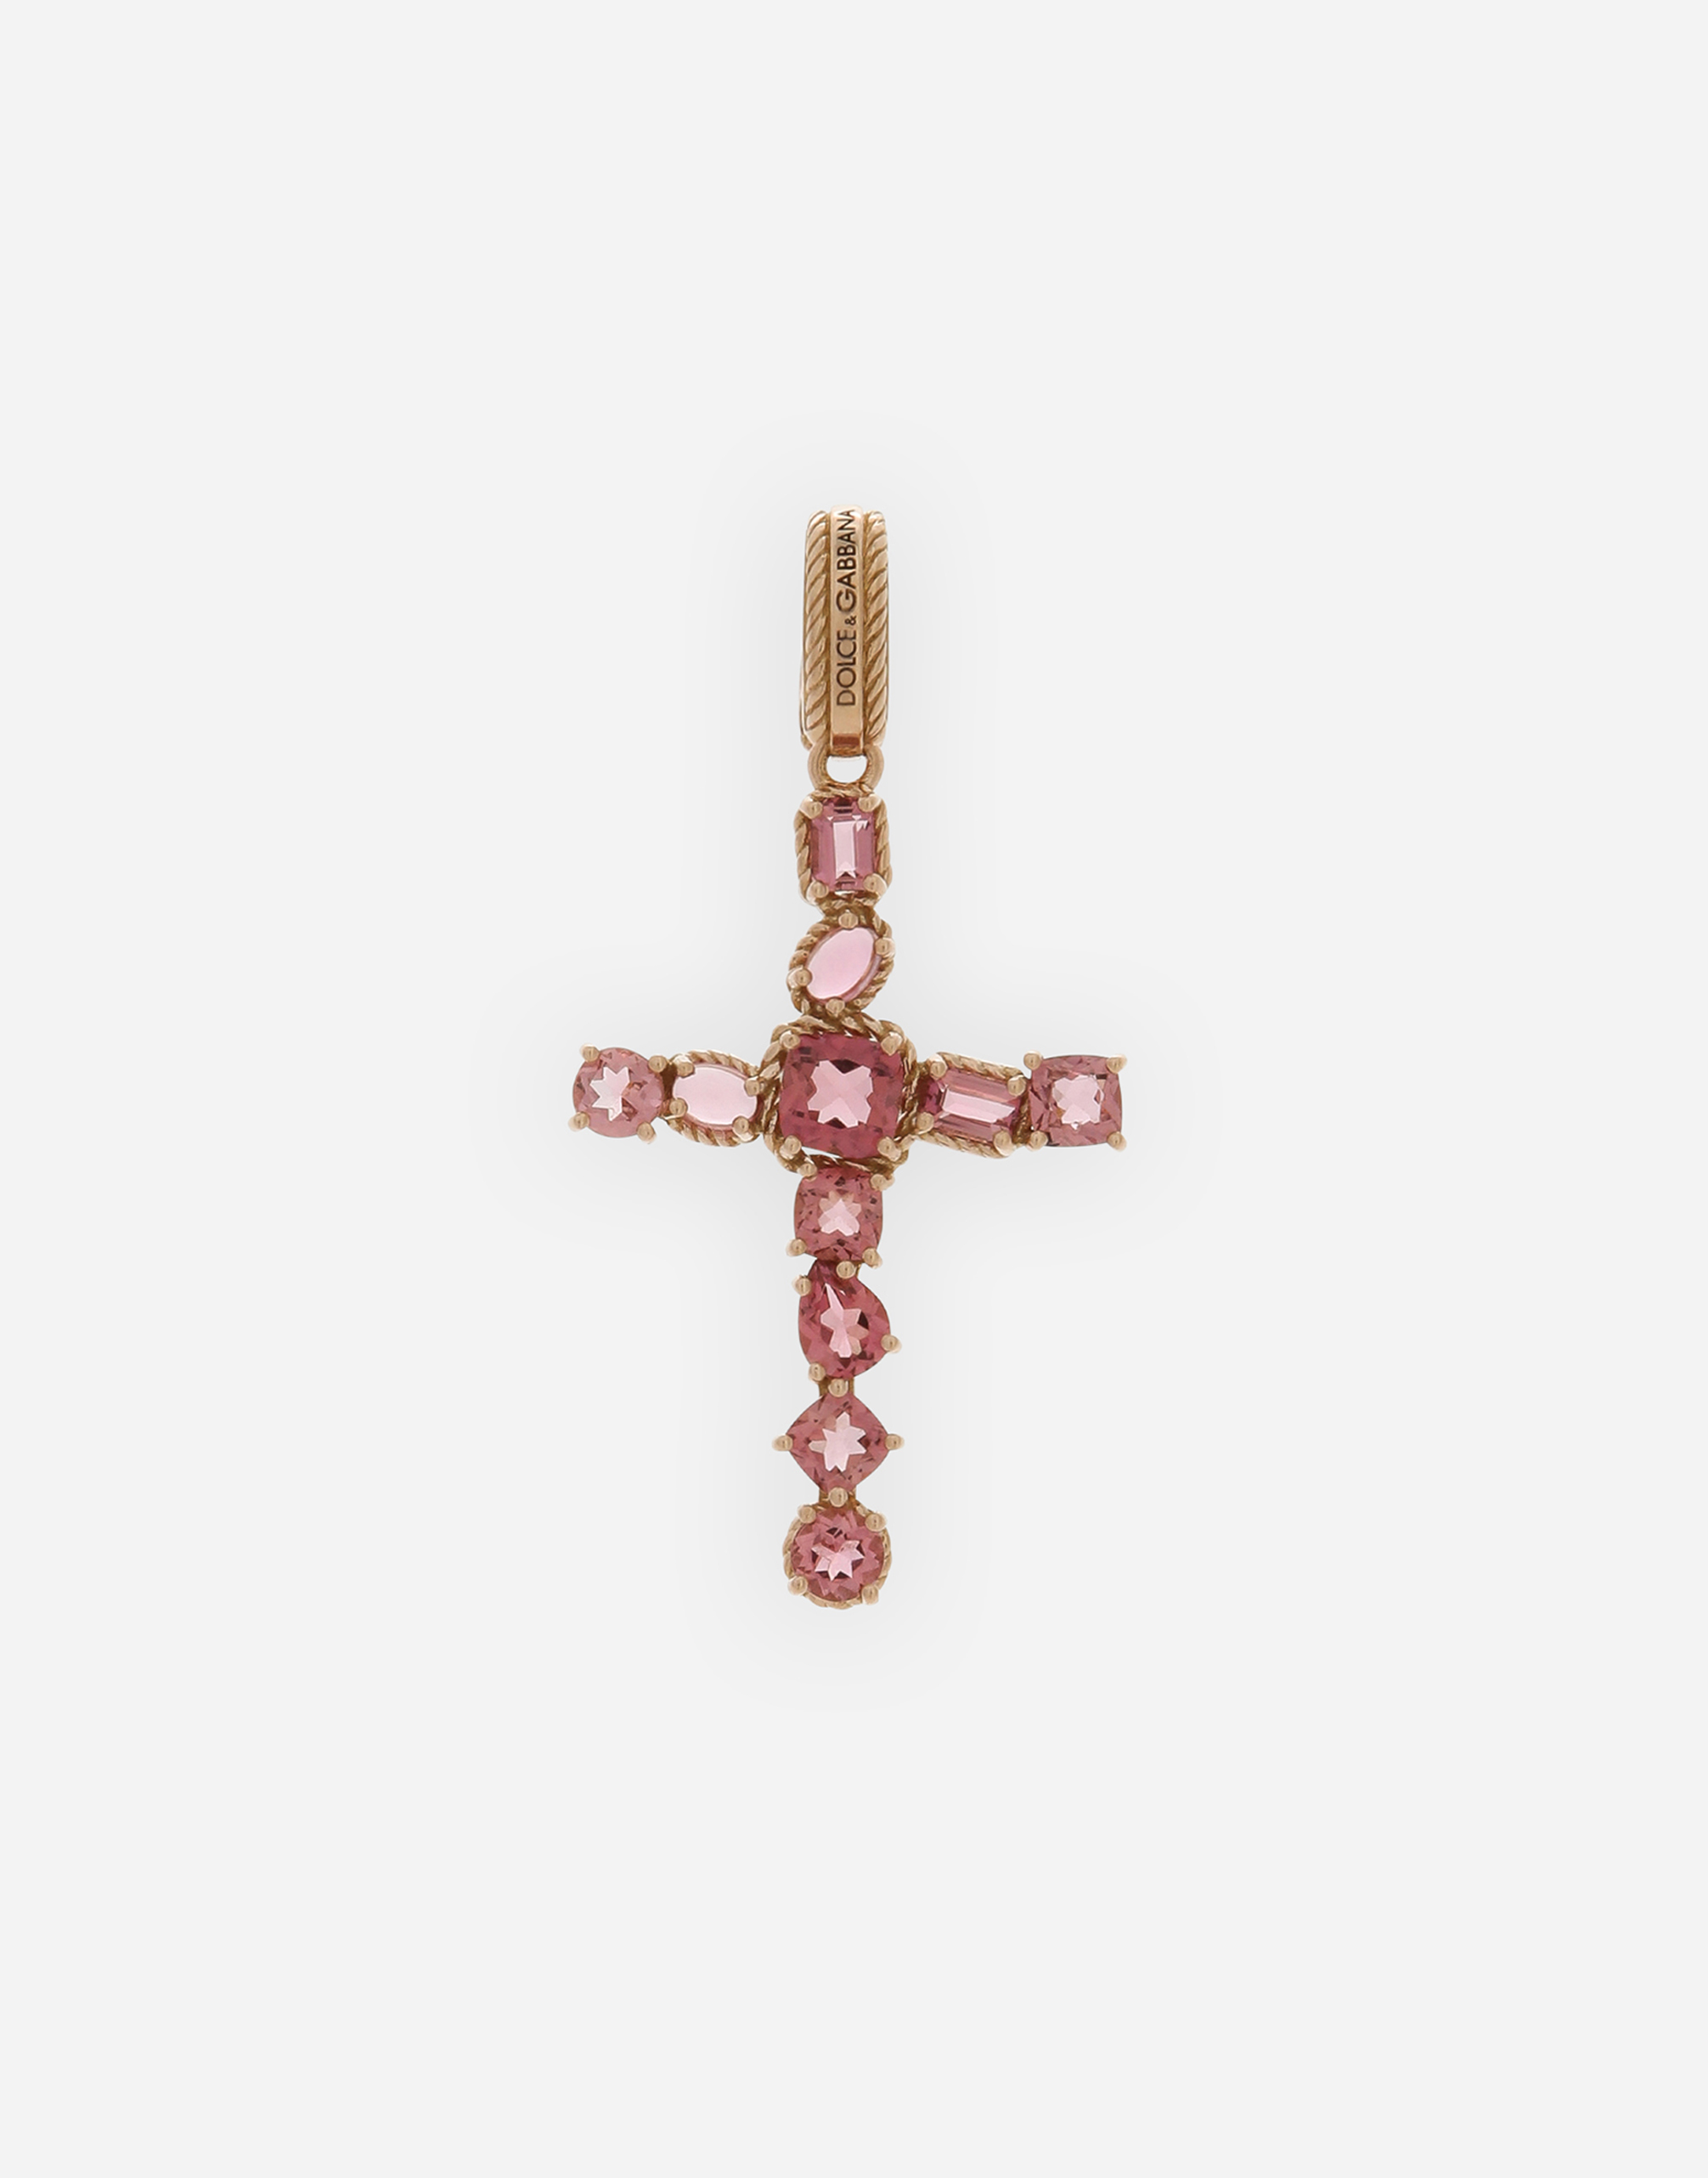 Dolce & Gabbana Anna Charm In Red Gold 18kt With Pink Tourmalines